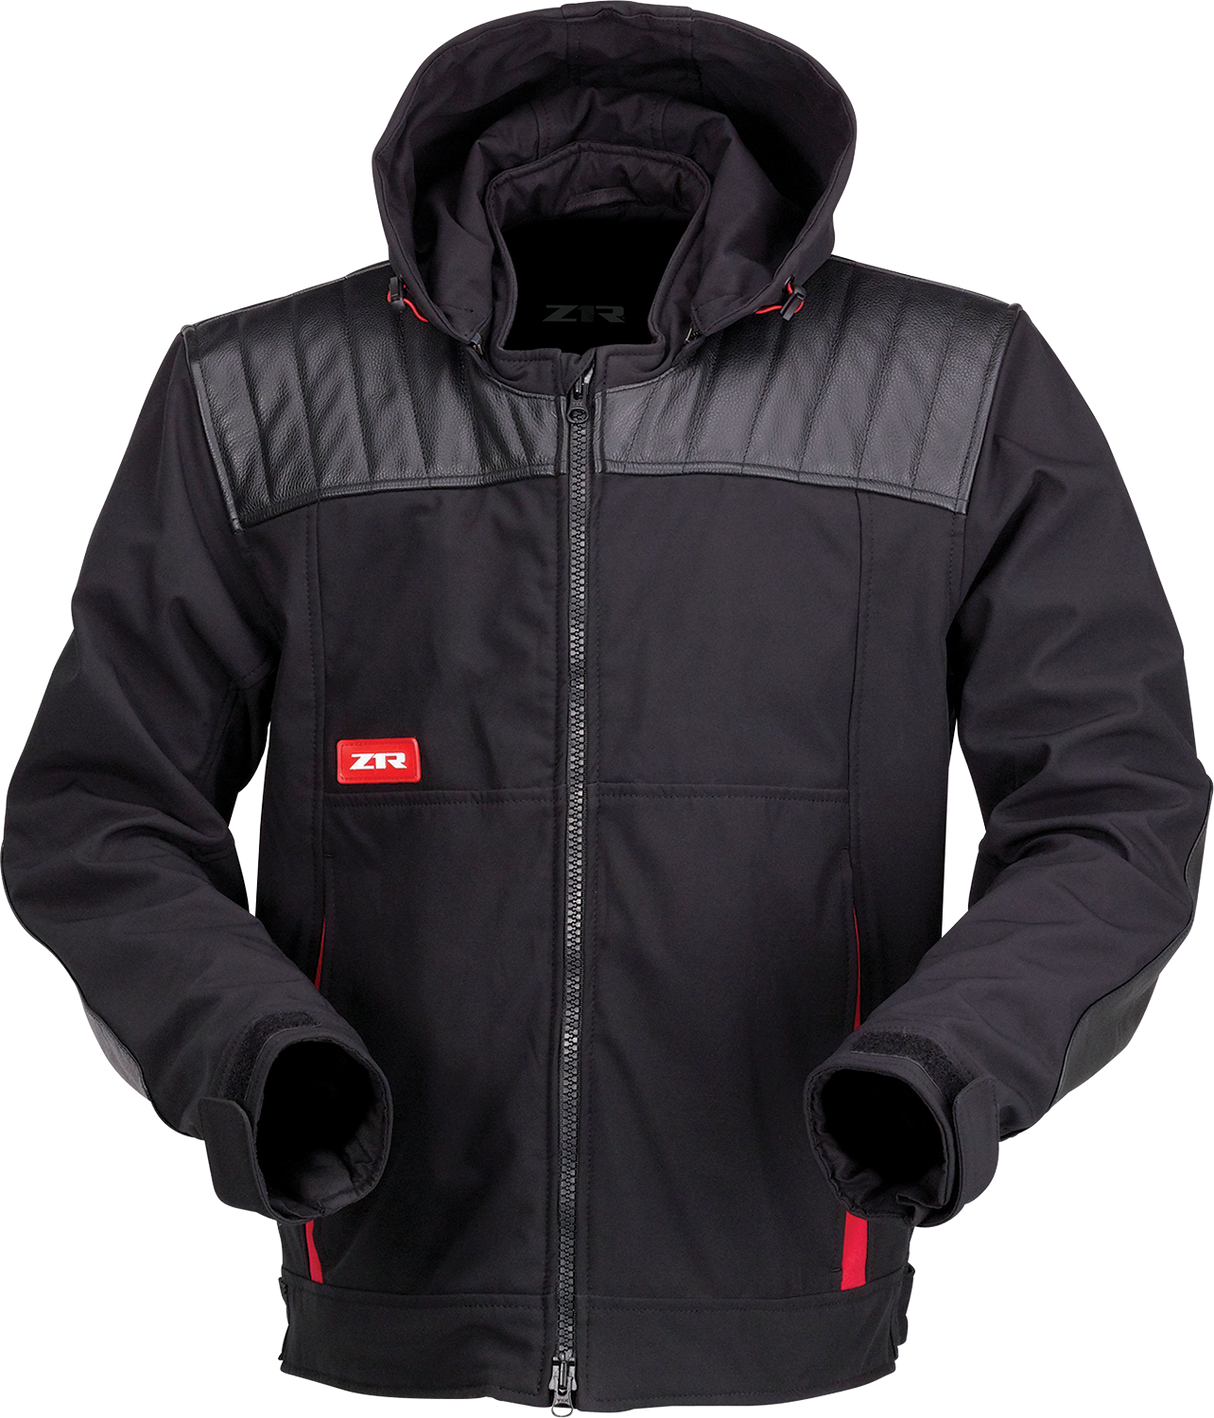 Z1R Armored Jacket - Black/Red - 3XL 2820-6214